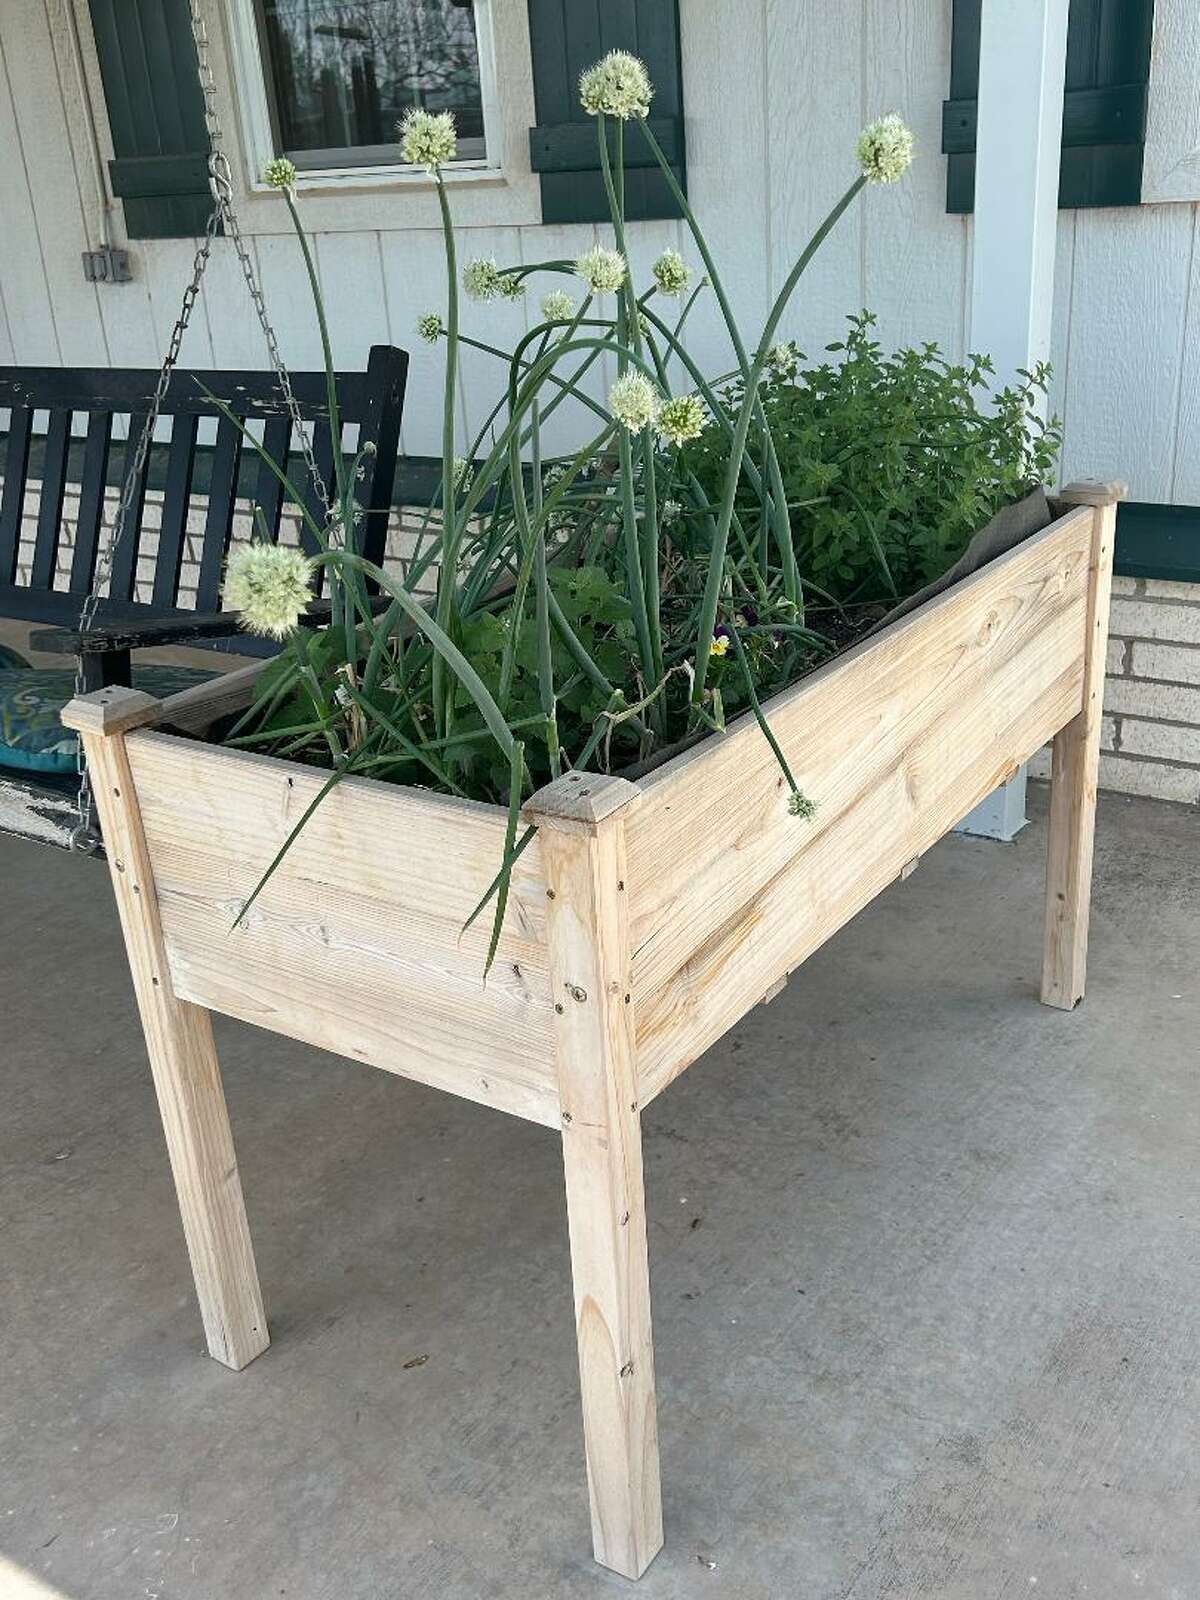 Raised beds are a great option for many reasons. 